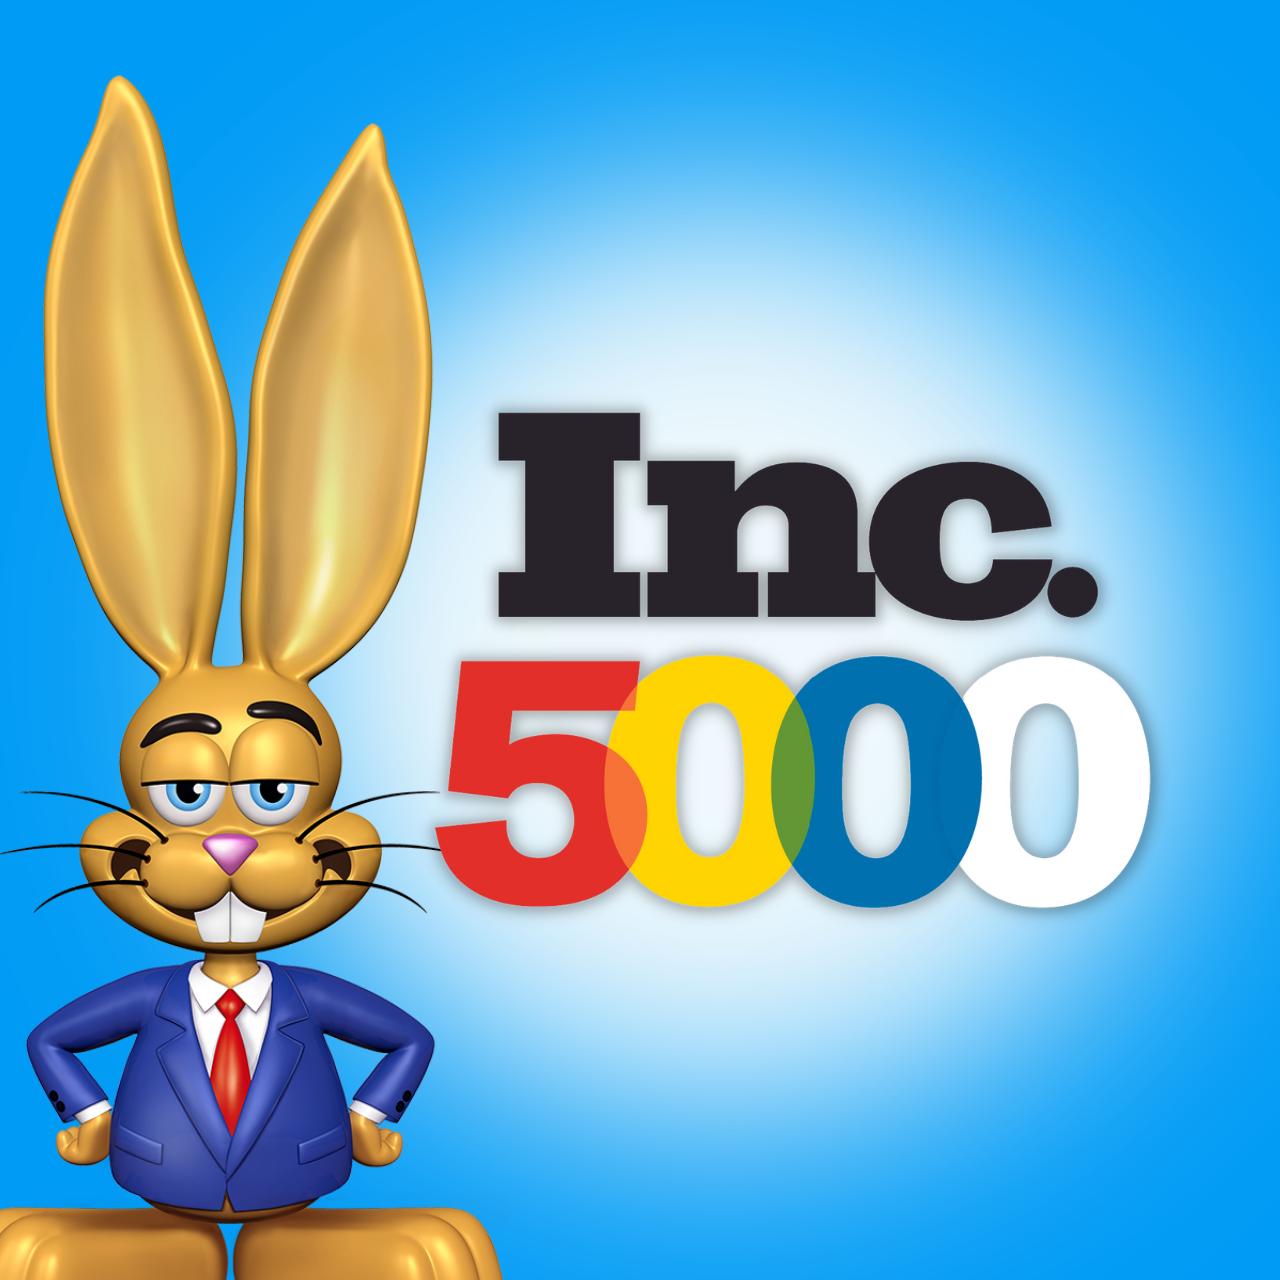 Jackrabbit Technologies Earns Ranking on Exclusive Inc. 5000 for 8th Consecutive Year